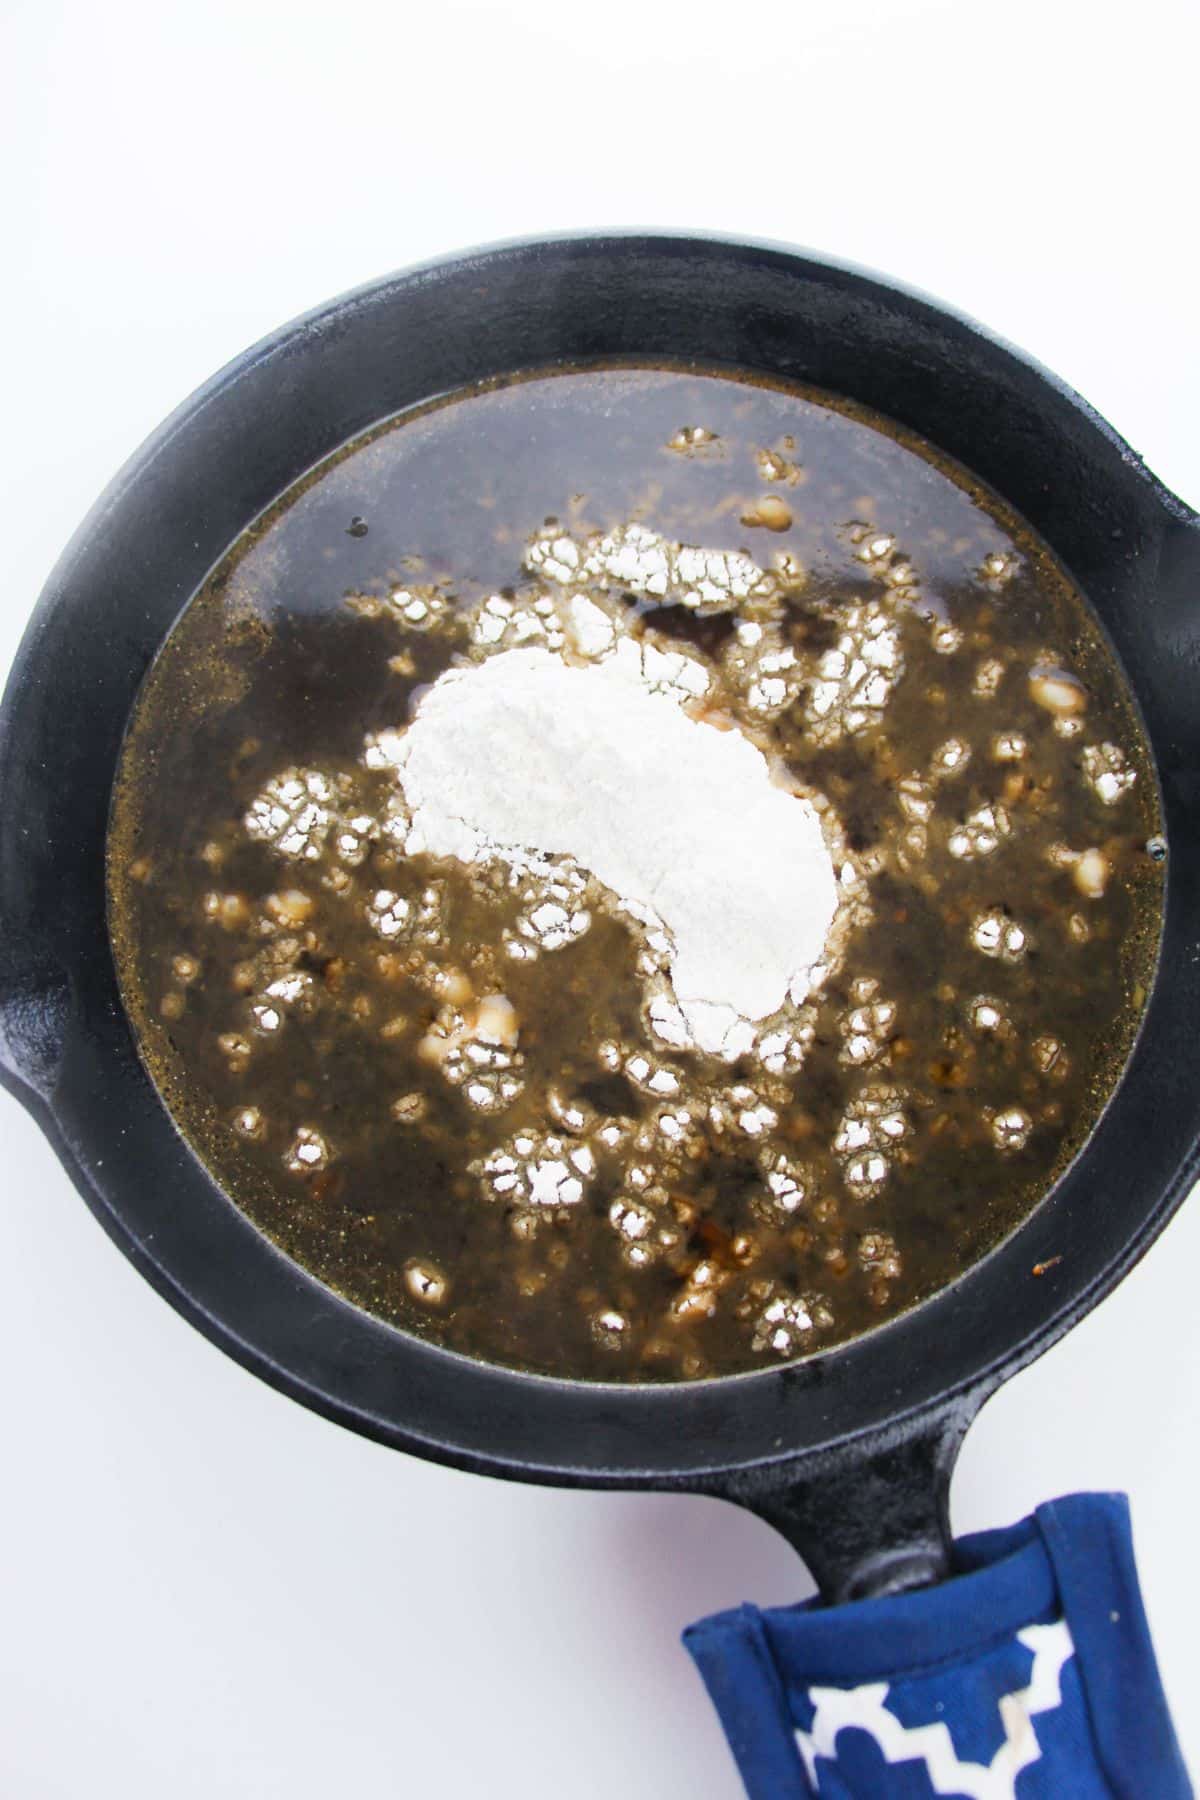 Beef broth and flour in a skillet.